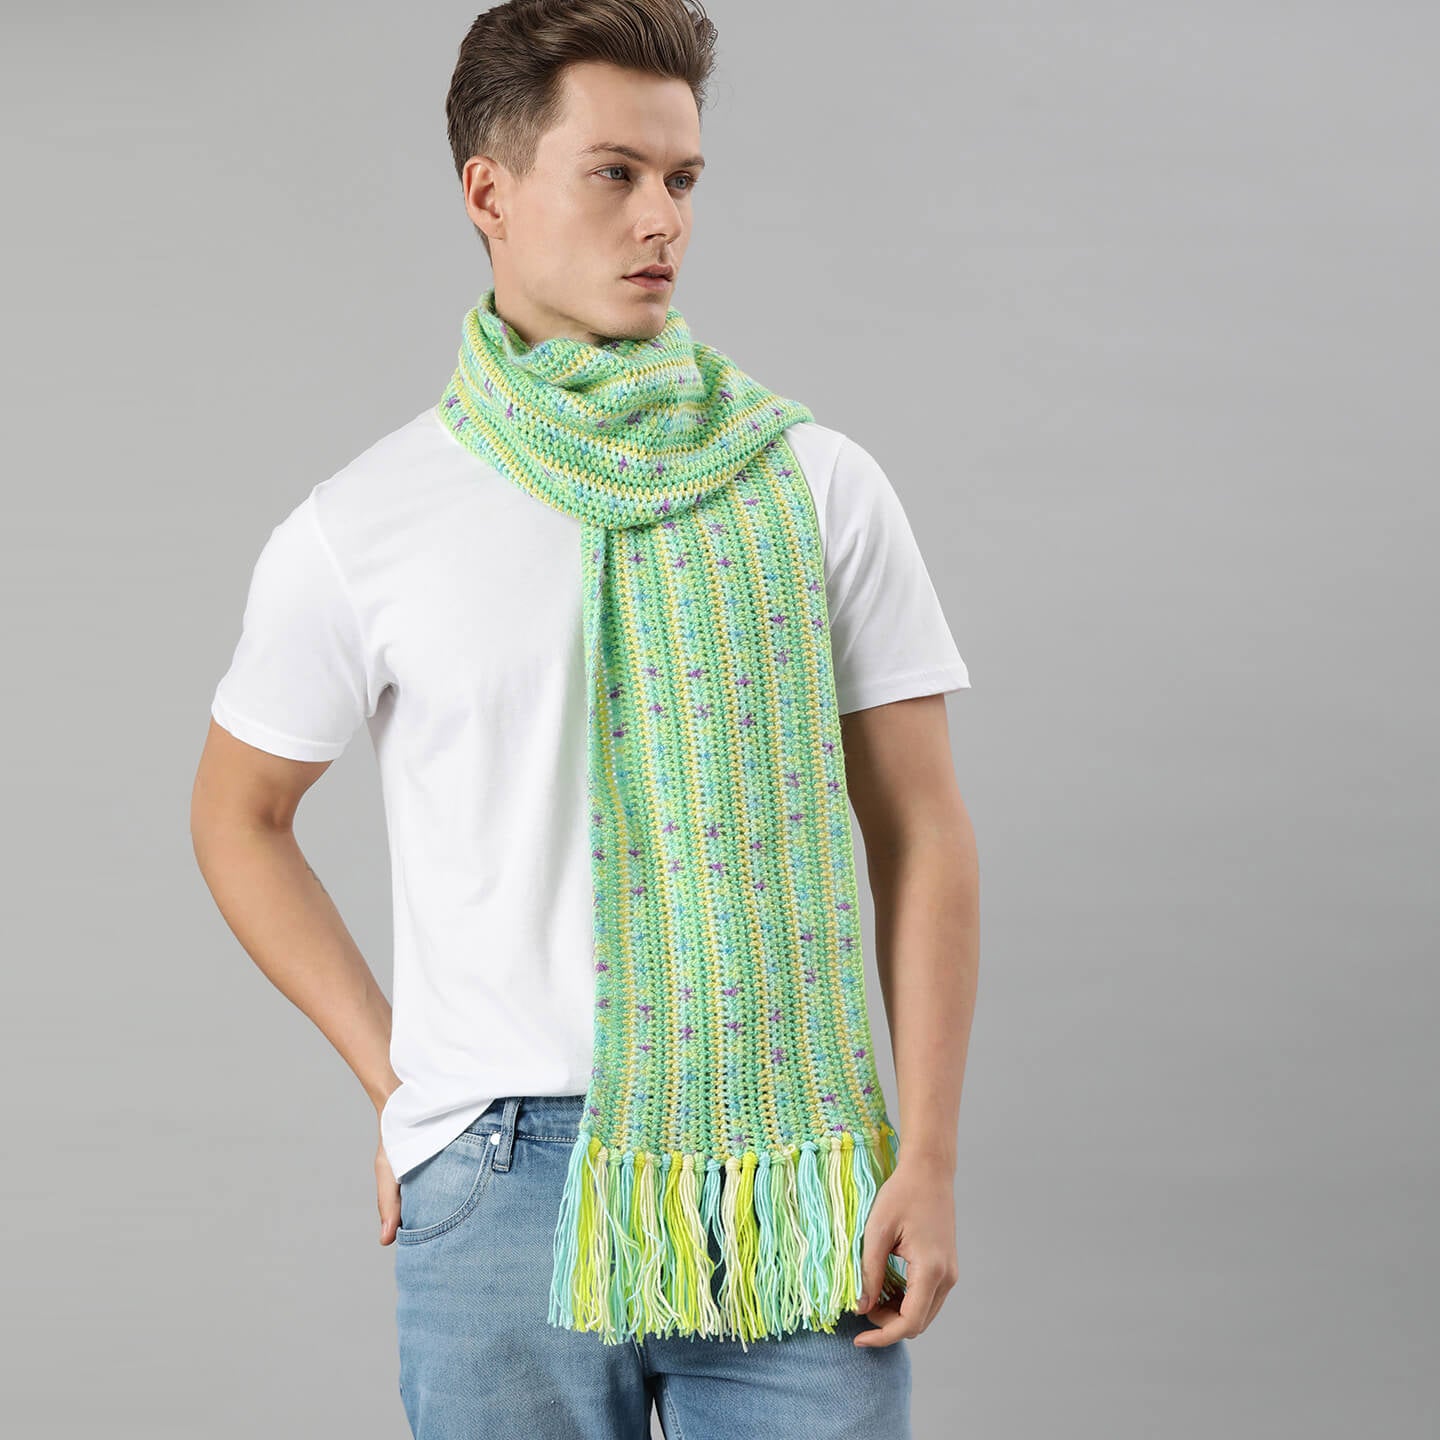 Scarf with Tassels - Multi-Color 2569